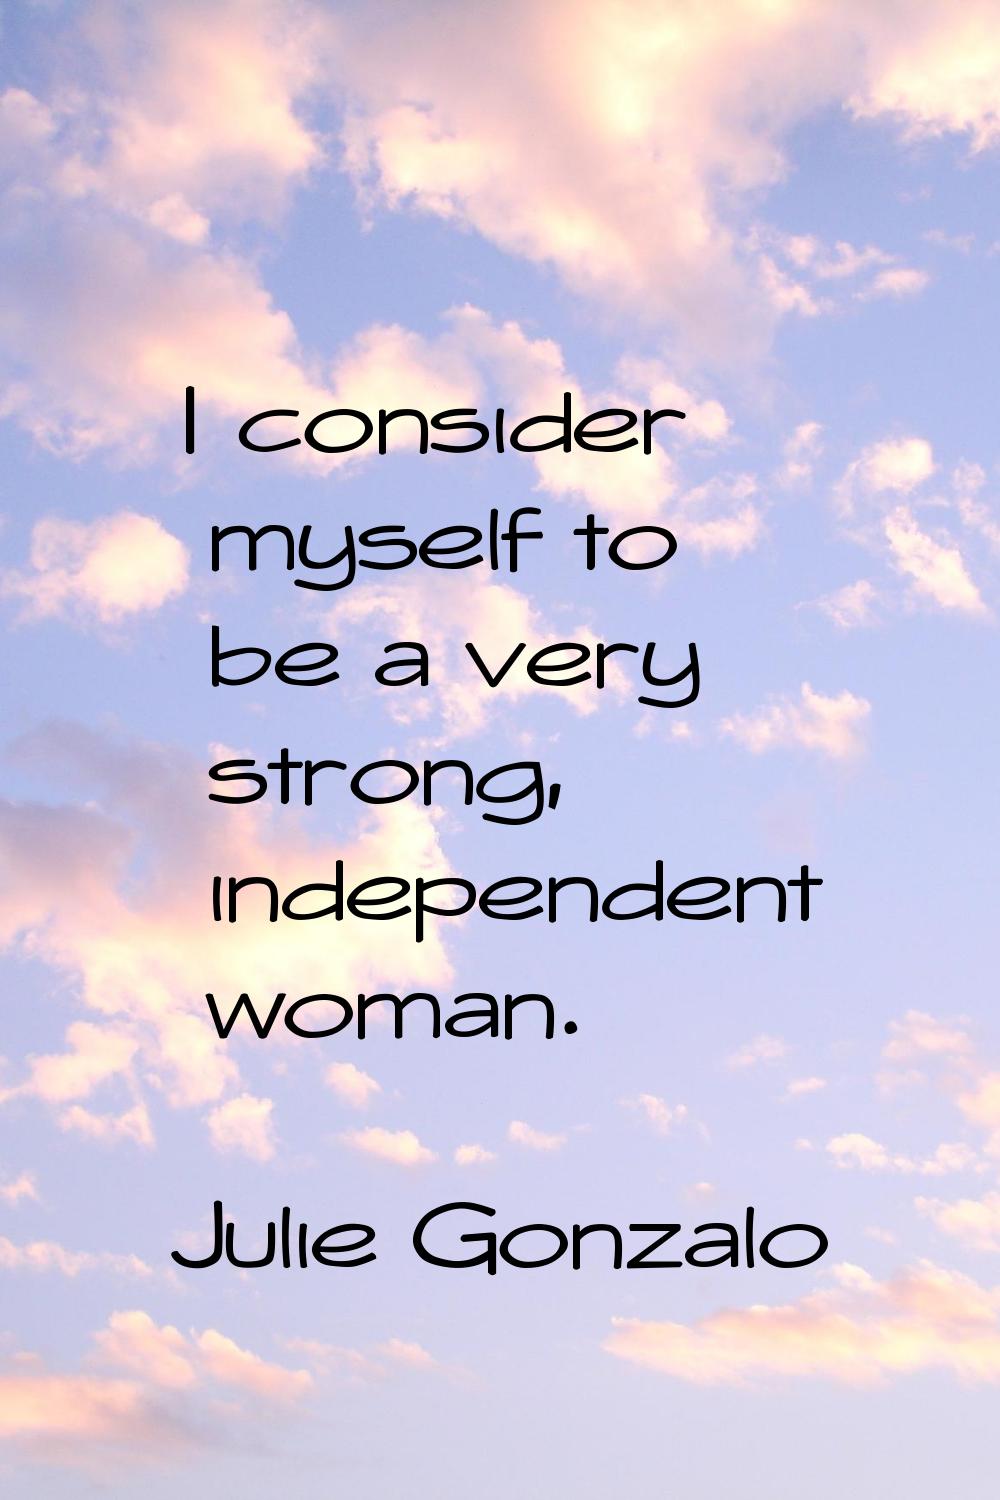 I consider myself to be a very strong, independent woman.